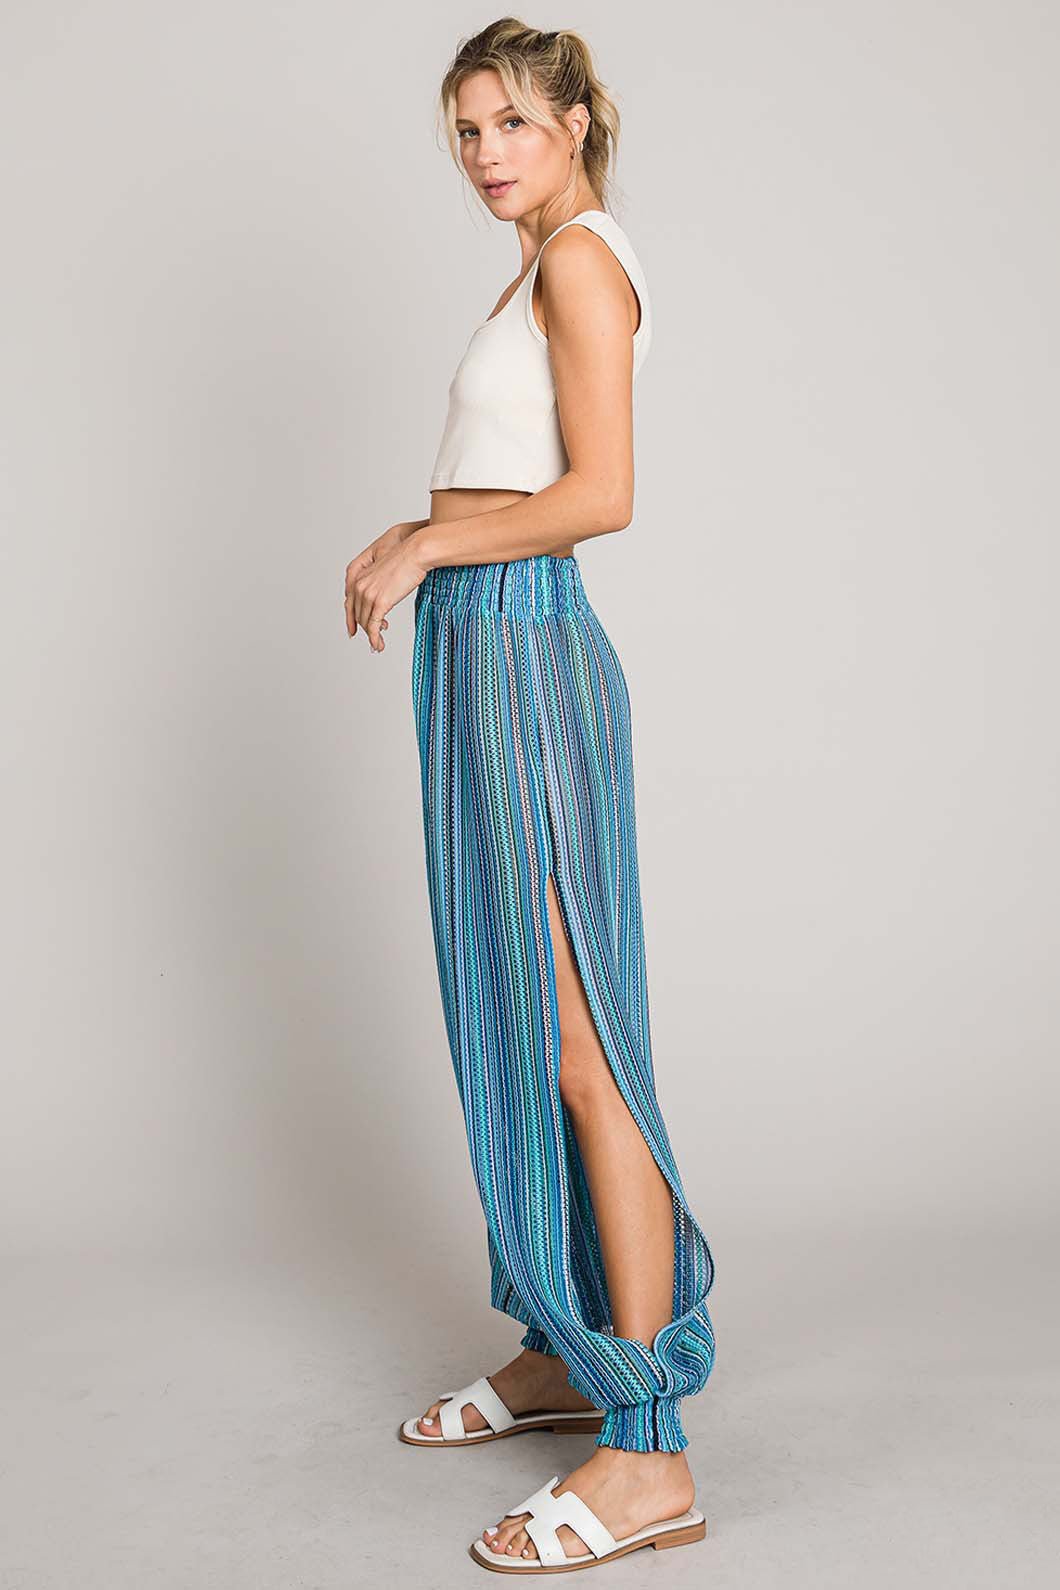 Striped Smocked Cover Up Pants in AquaCover-UpCotton Bleu